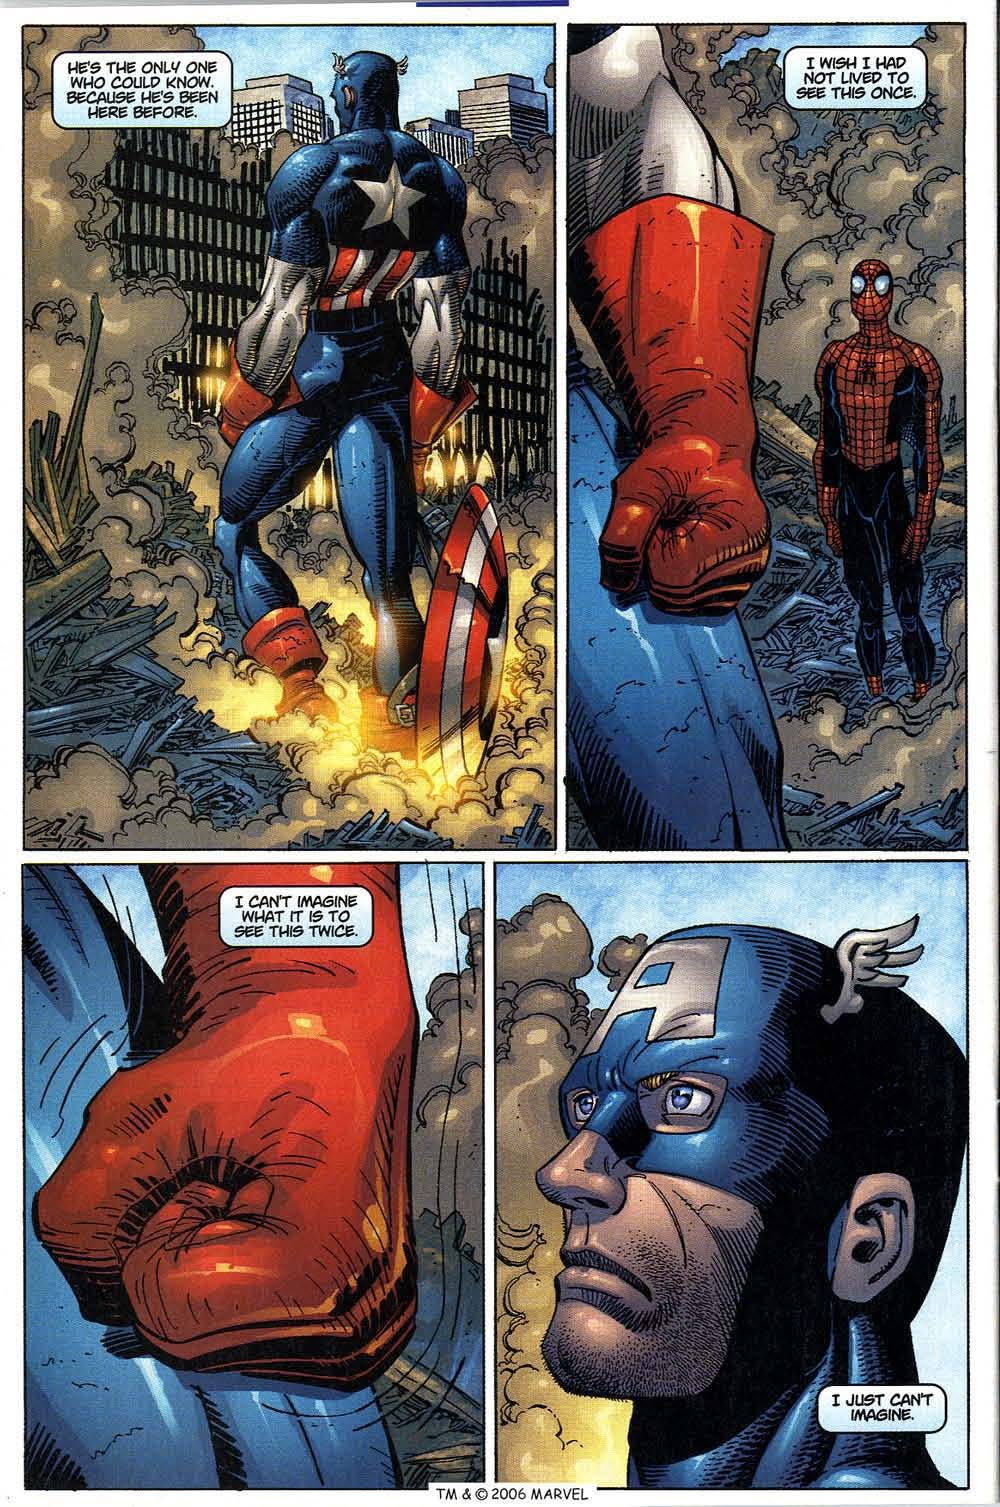 Comics page showing Spider-Man looking at Captain America, who stares in shock at Ground Zero. Text of Spider-Man's thoughts: 'He's the only one who could know. Because he's been here before.' 'I wish I had not lived to see this once' 'I can't imagine what it is to see this twice... I just can't imagine' 